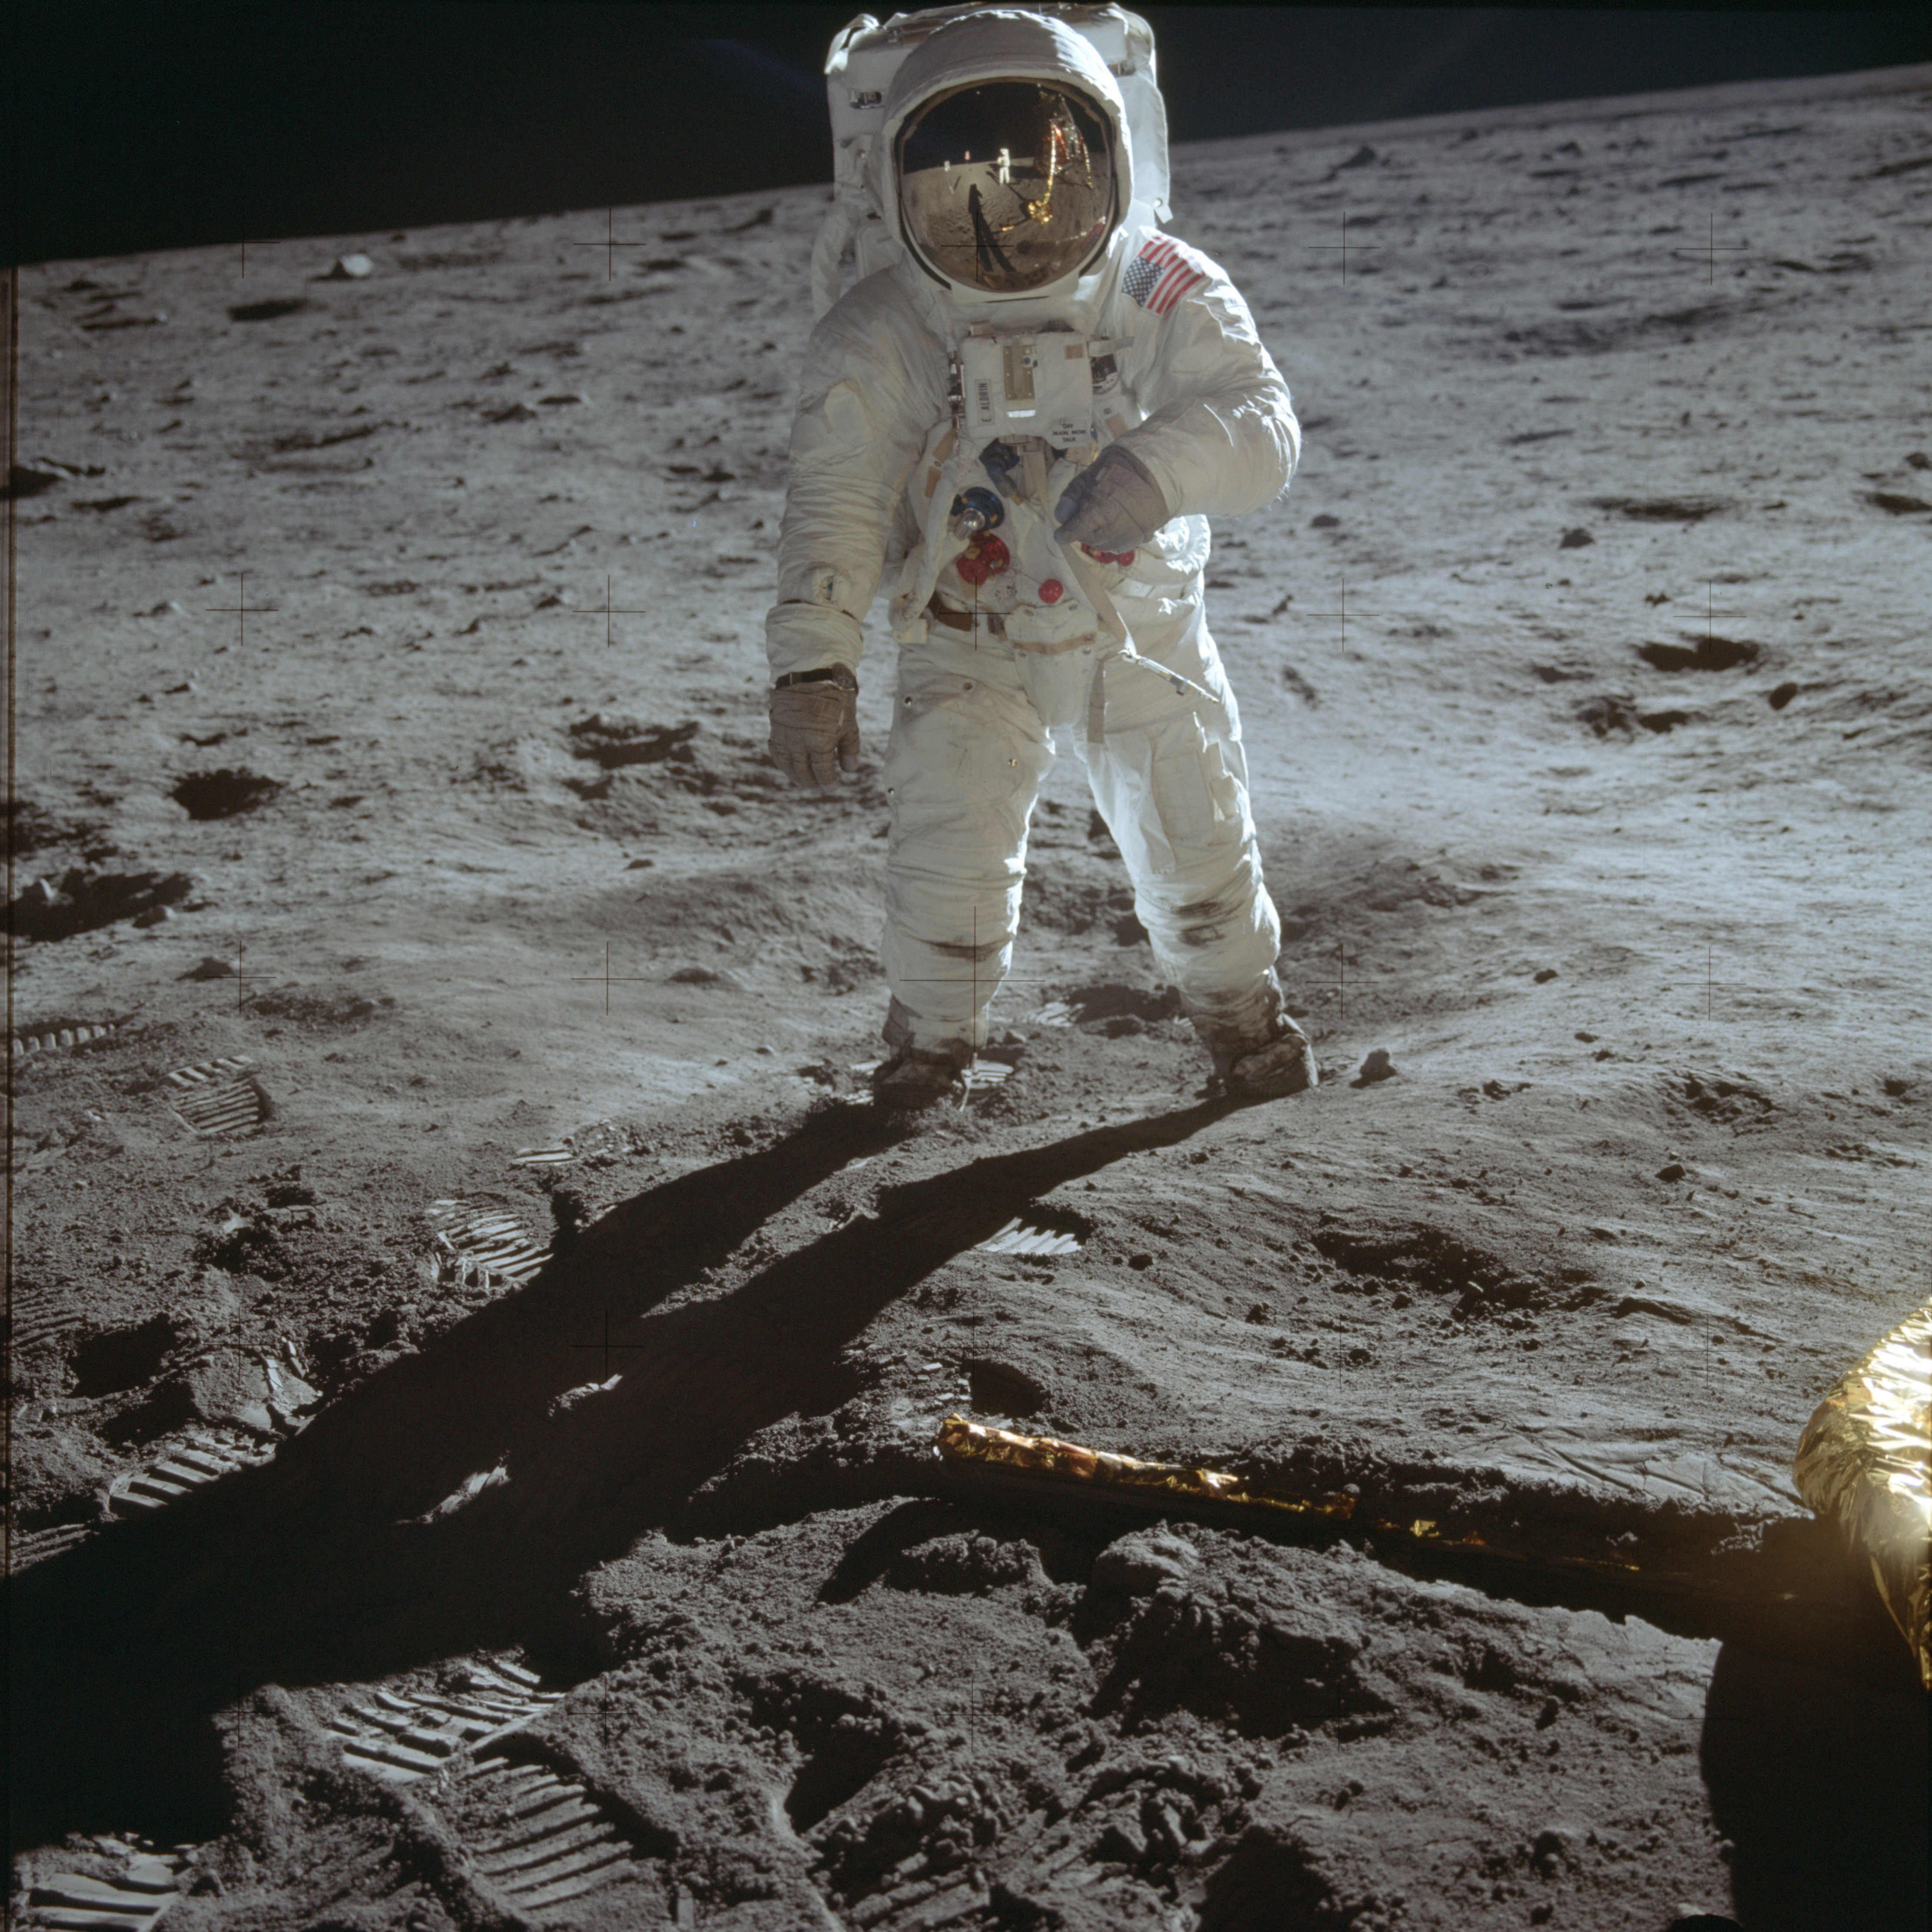 The world's first moonwalker, Neil Armstrong, brought regolith back to Earth after he landed on the moon.